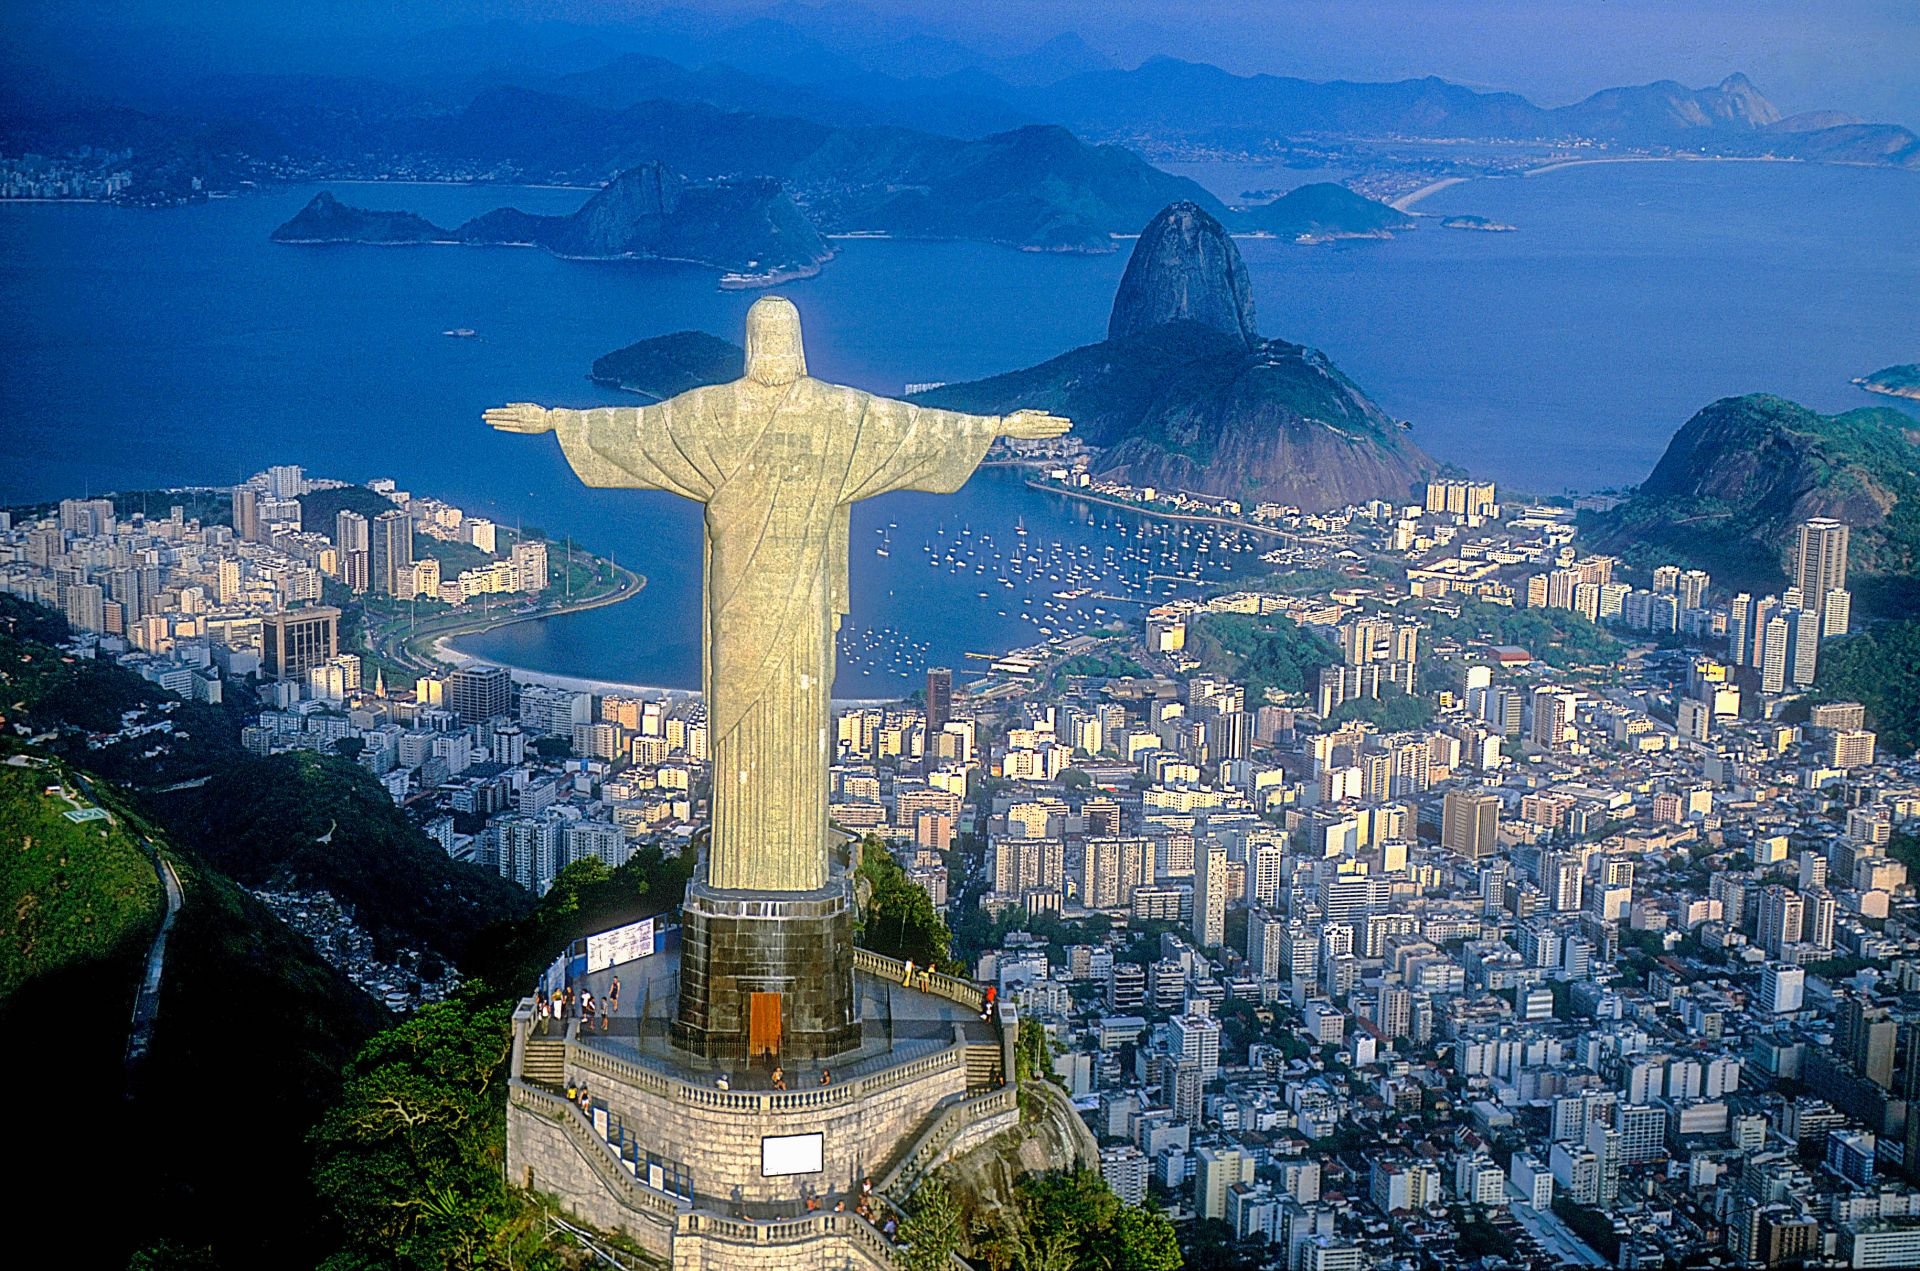 Aerial-view-of-Christ-Sugarloaf-Rio-de-Janeiro-Brazil-iStock_55264880_LARGE-EDITORIAL-ONLY-dolphinphoto-2-1707868554.jpg